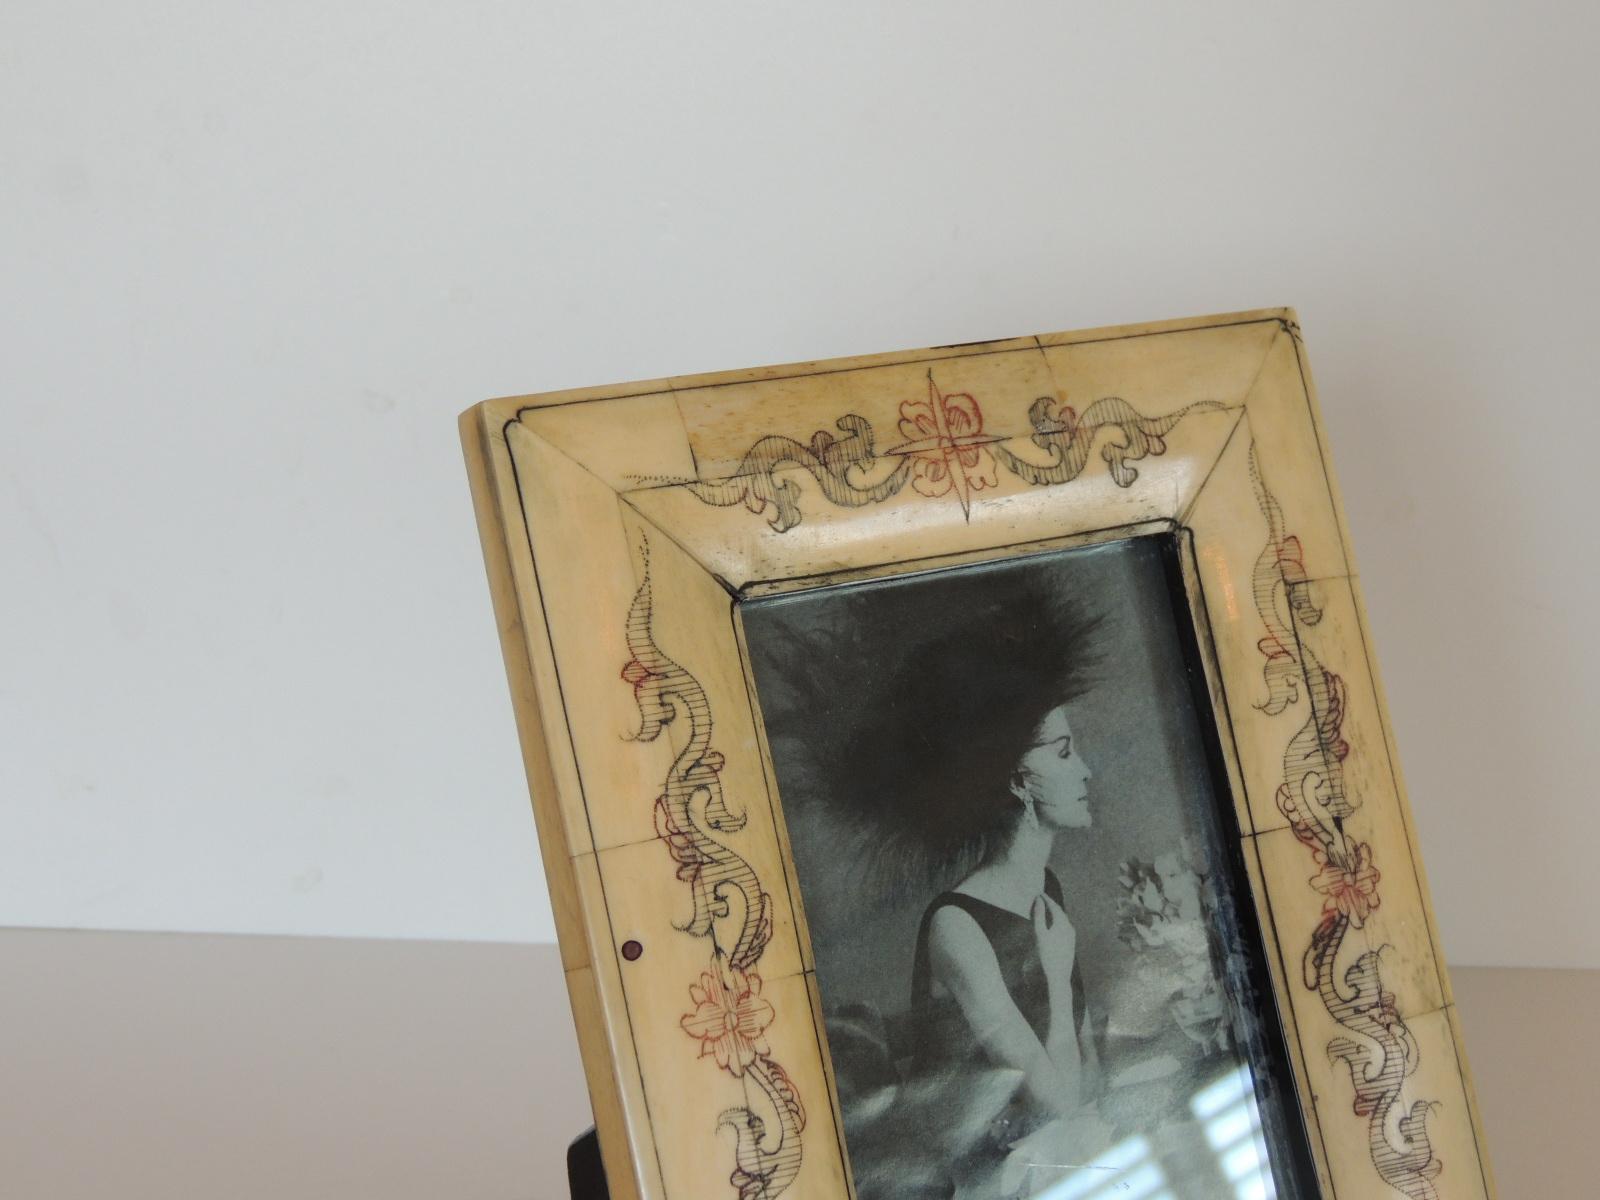 Vintage Camel Bone Picture Frame with Carved Design In The Front.
Black lacquered wood back.
Size: 5.3/4